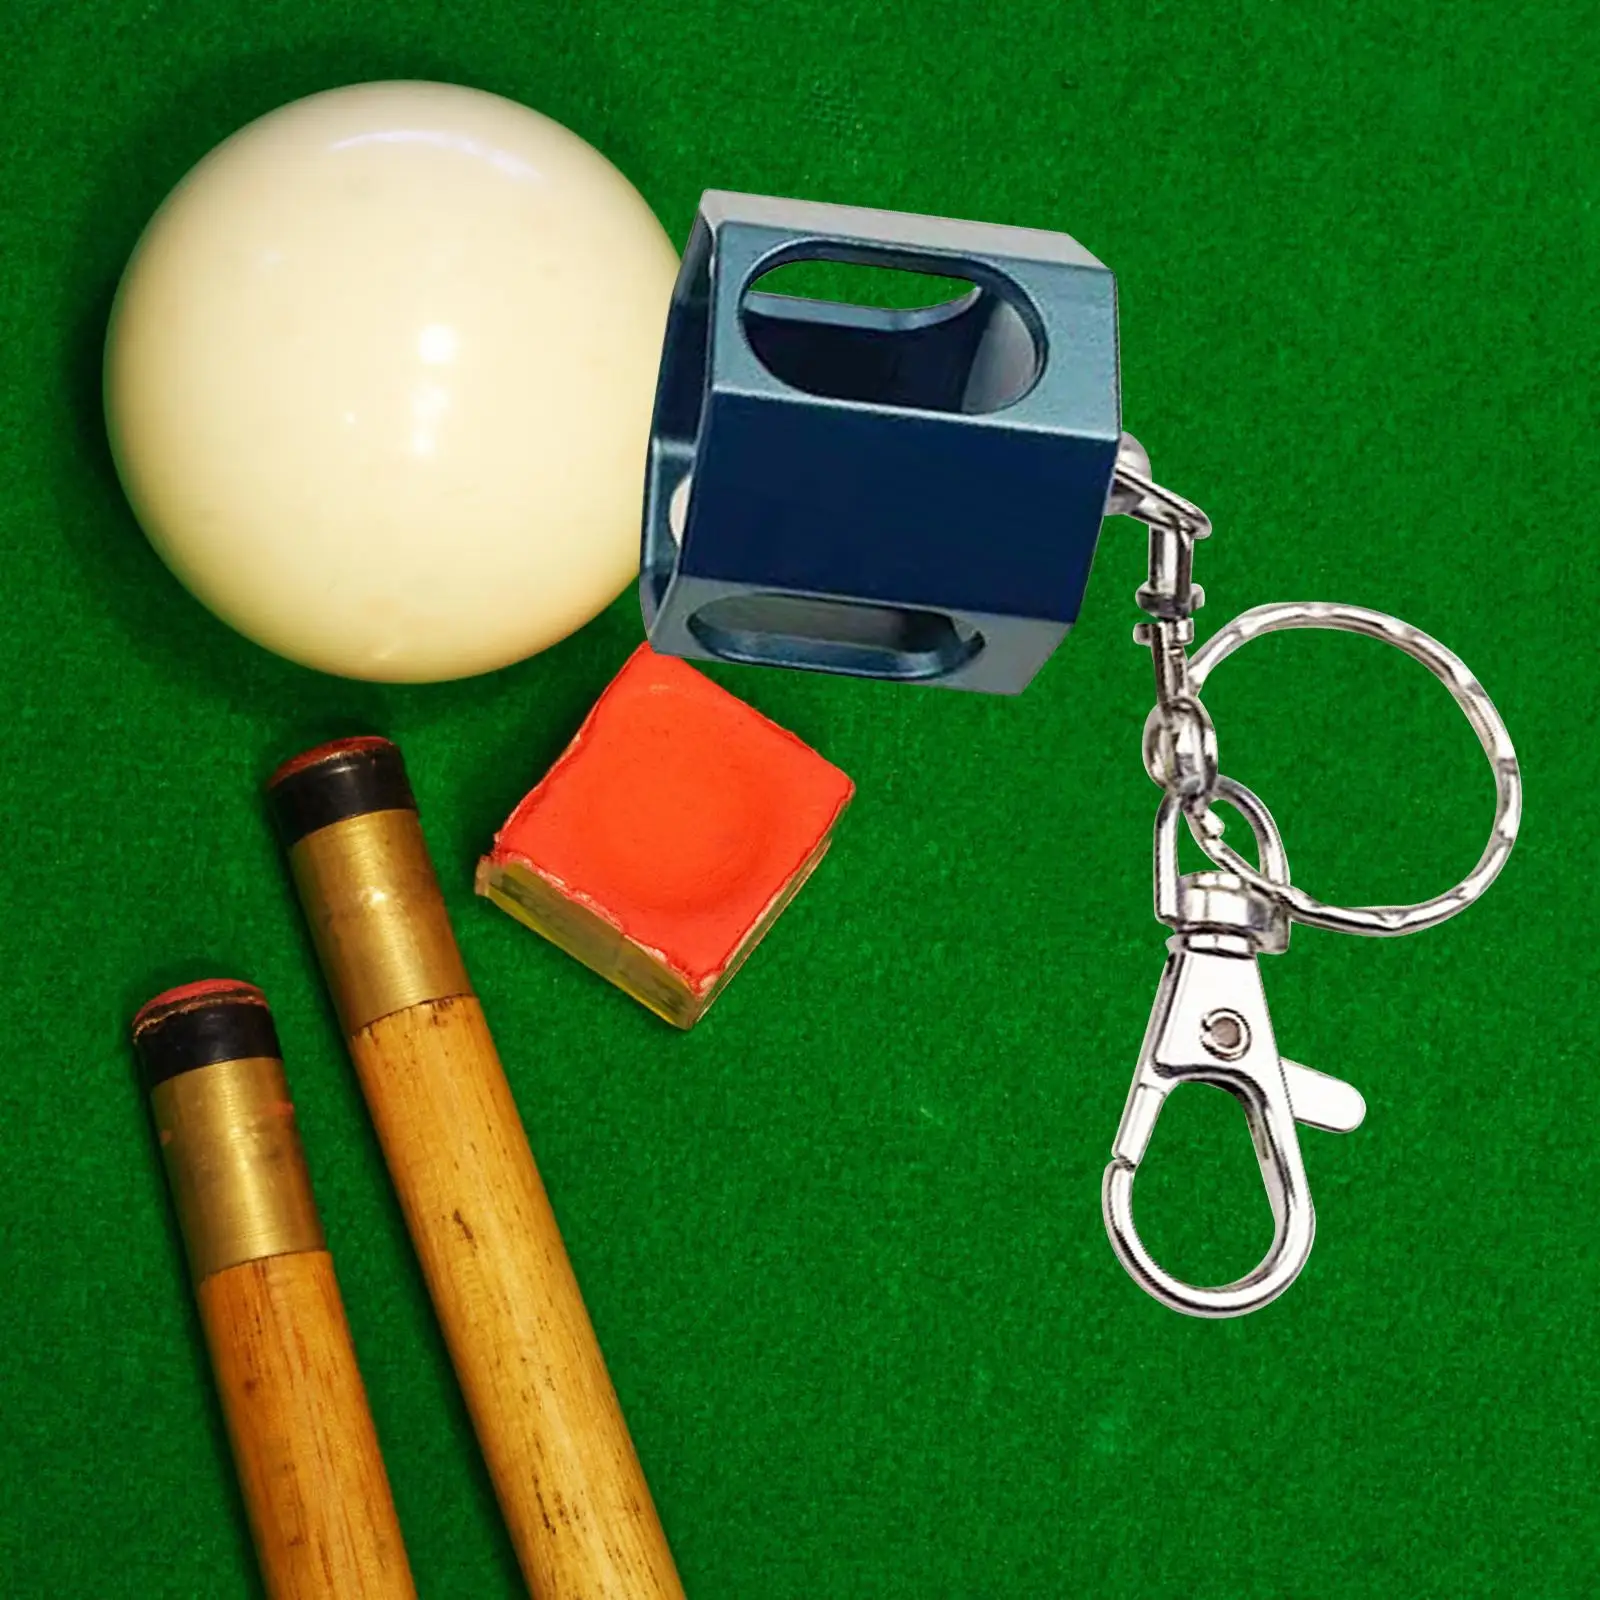 Pool Cue Chalk Holder with Keychain Snooker Accessories Chalk Carrying Case